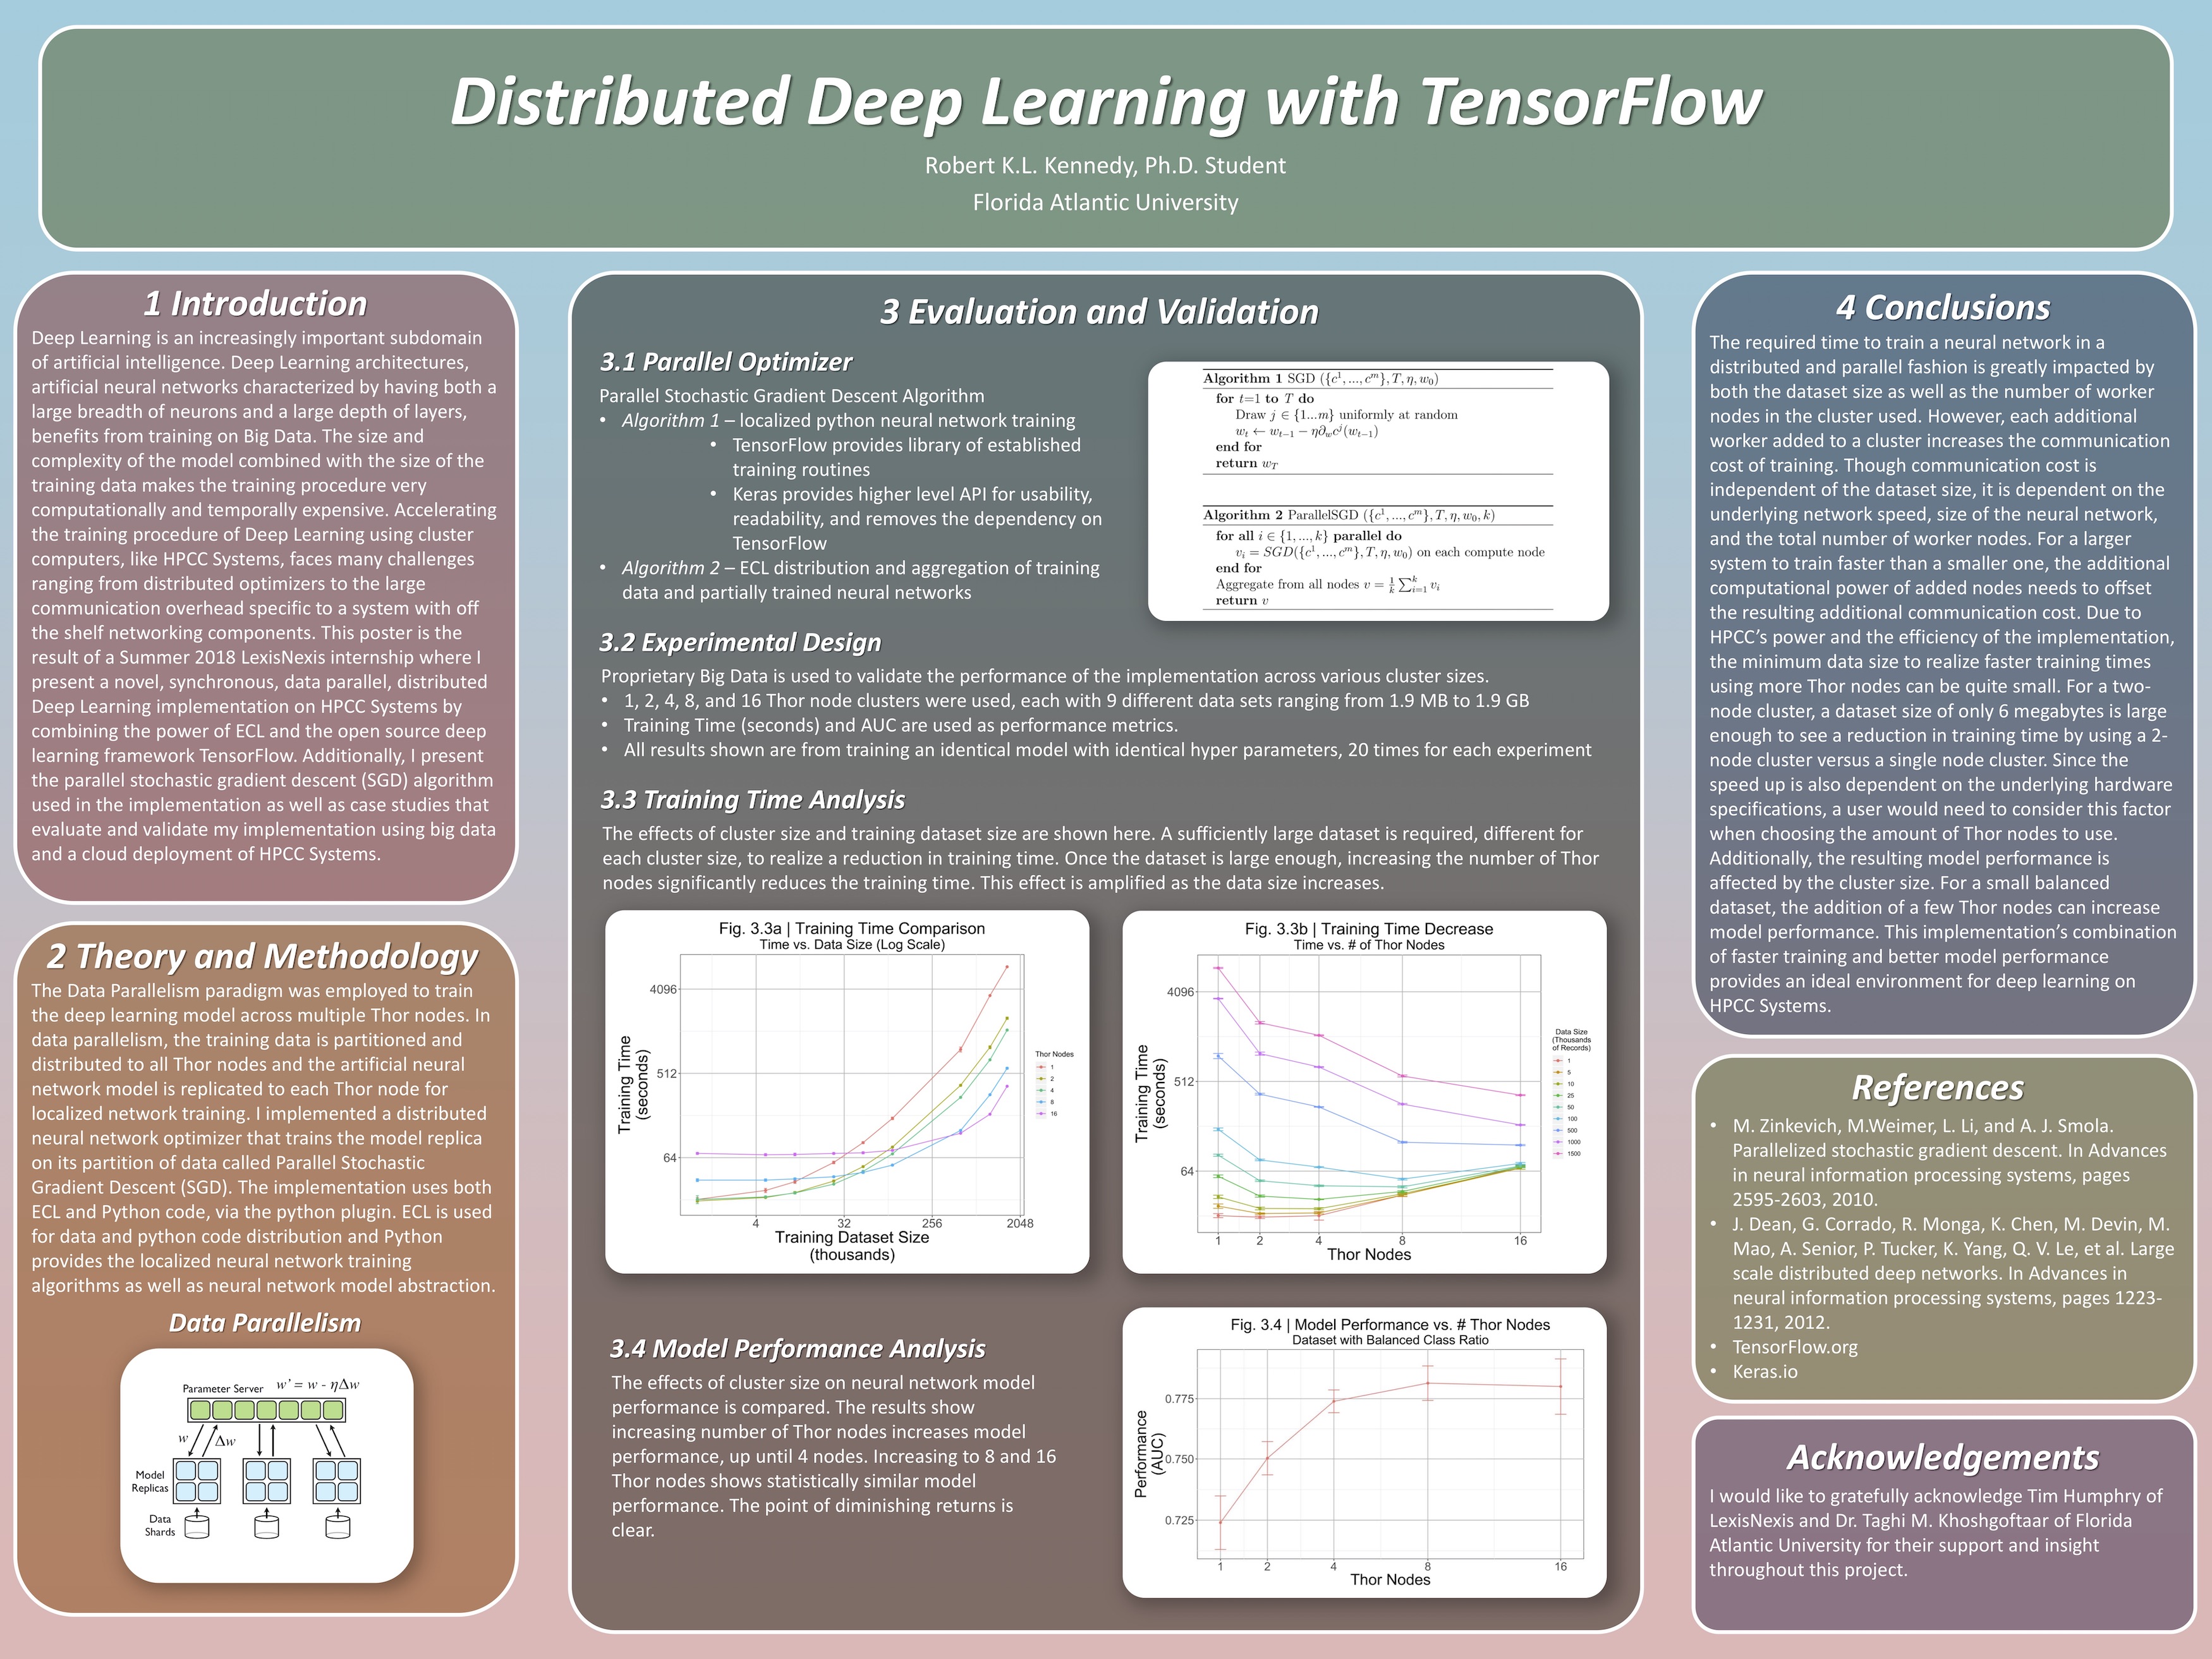 Robert Kennedy - Distributed deep learning with TensorFlow